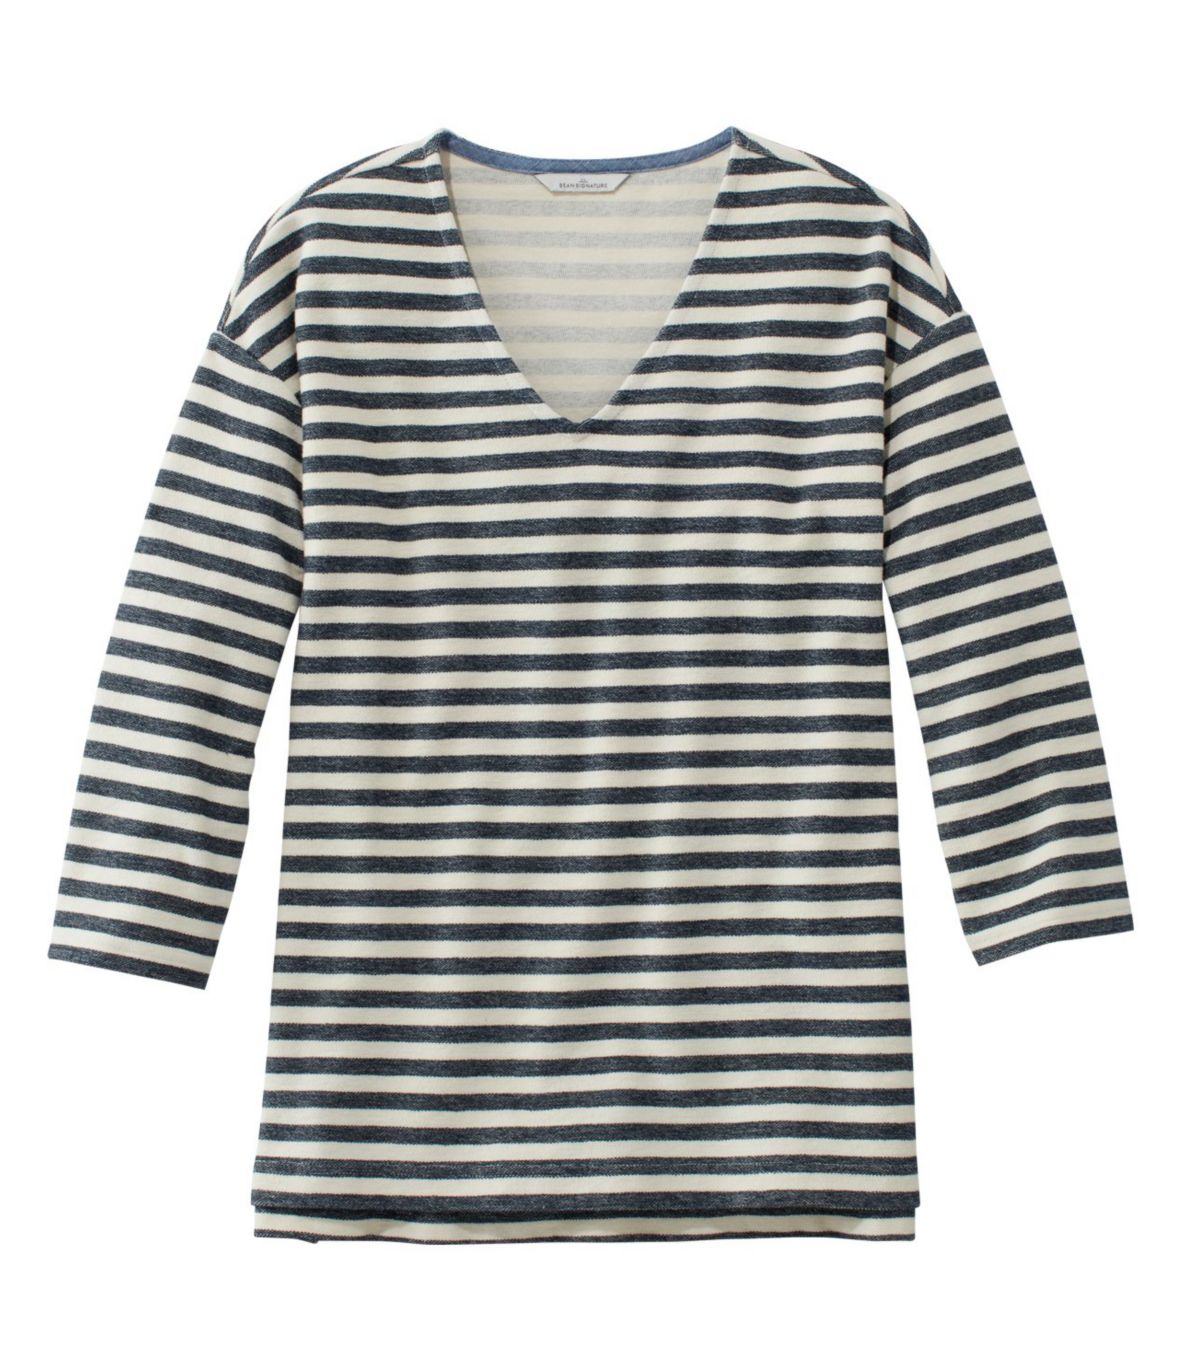 Women's Signature French Sailor Knit Tee, V-Neck